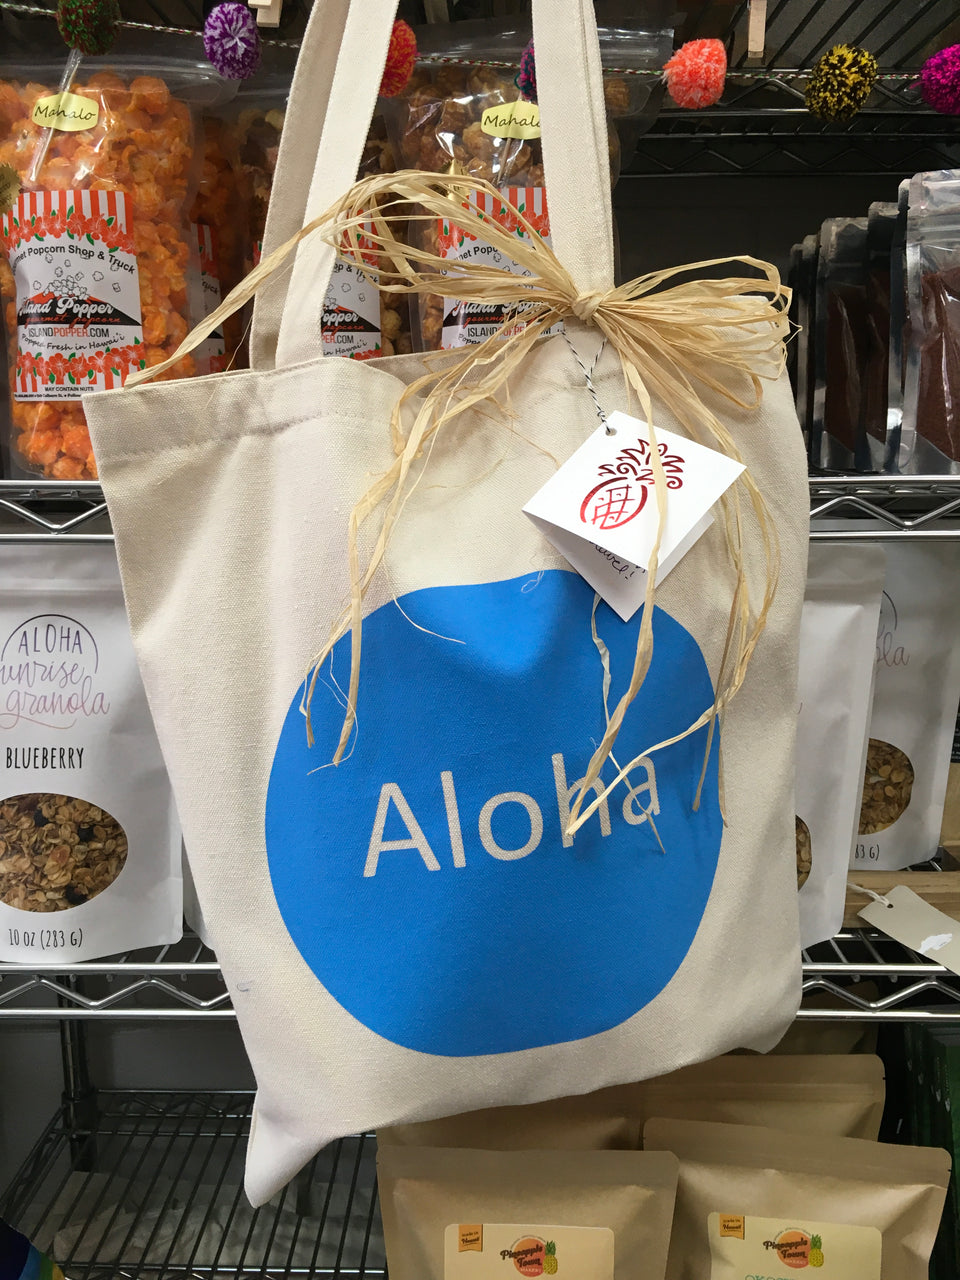 aloha canvas gift tote tied with rafia and the red pineapple gift tag